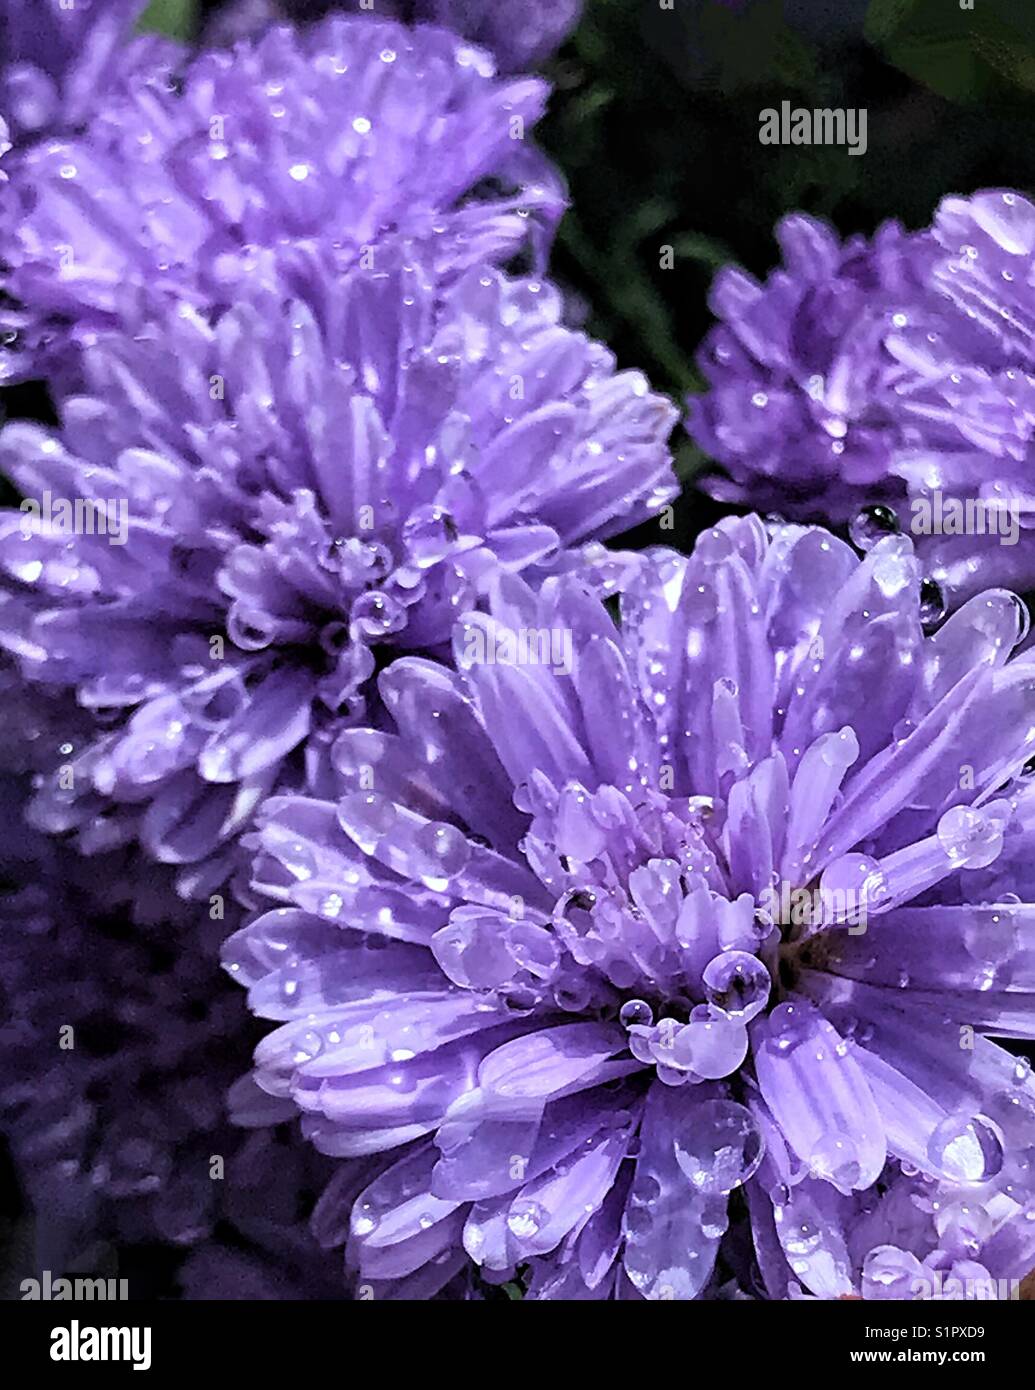 Purple Henry aster flowers covered with water droplets, Symphyotrichum novi-Belgium Stock Photo